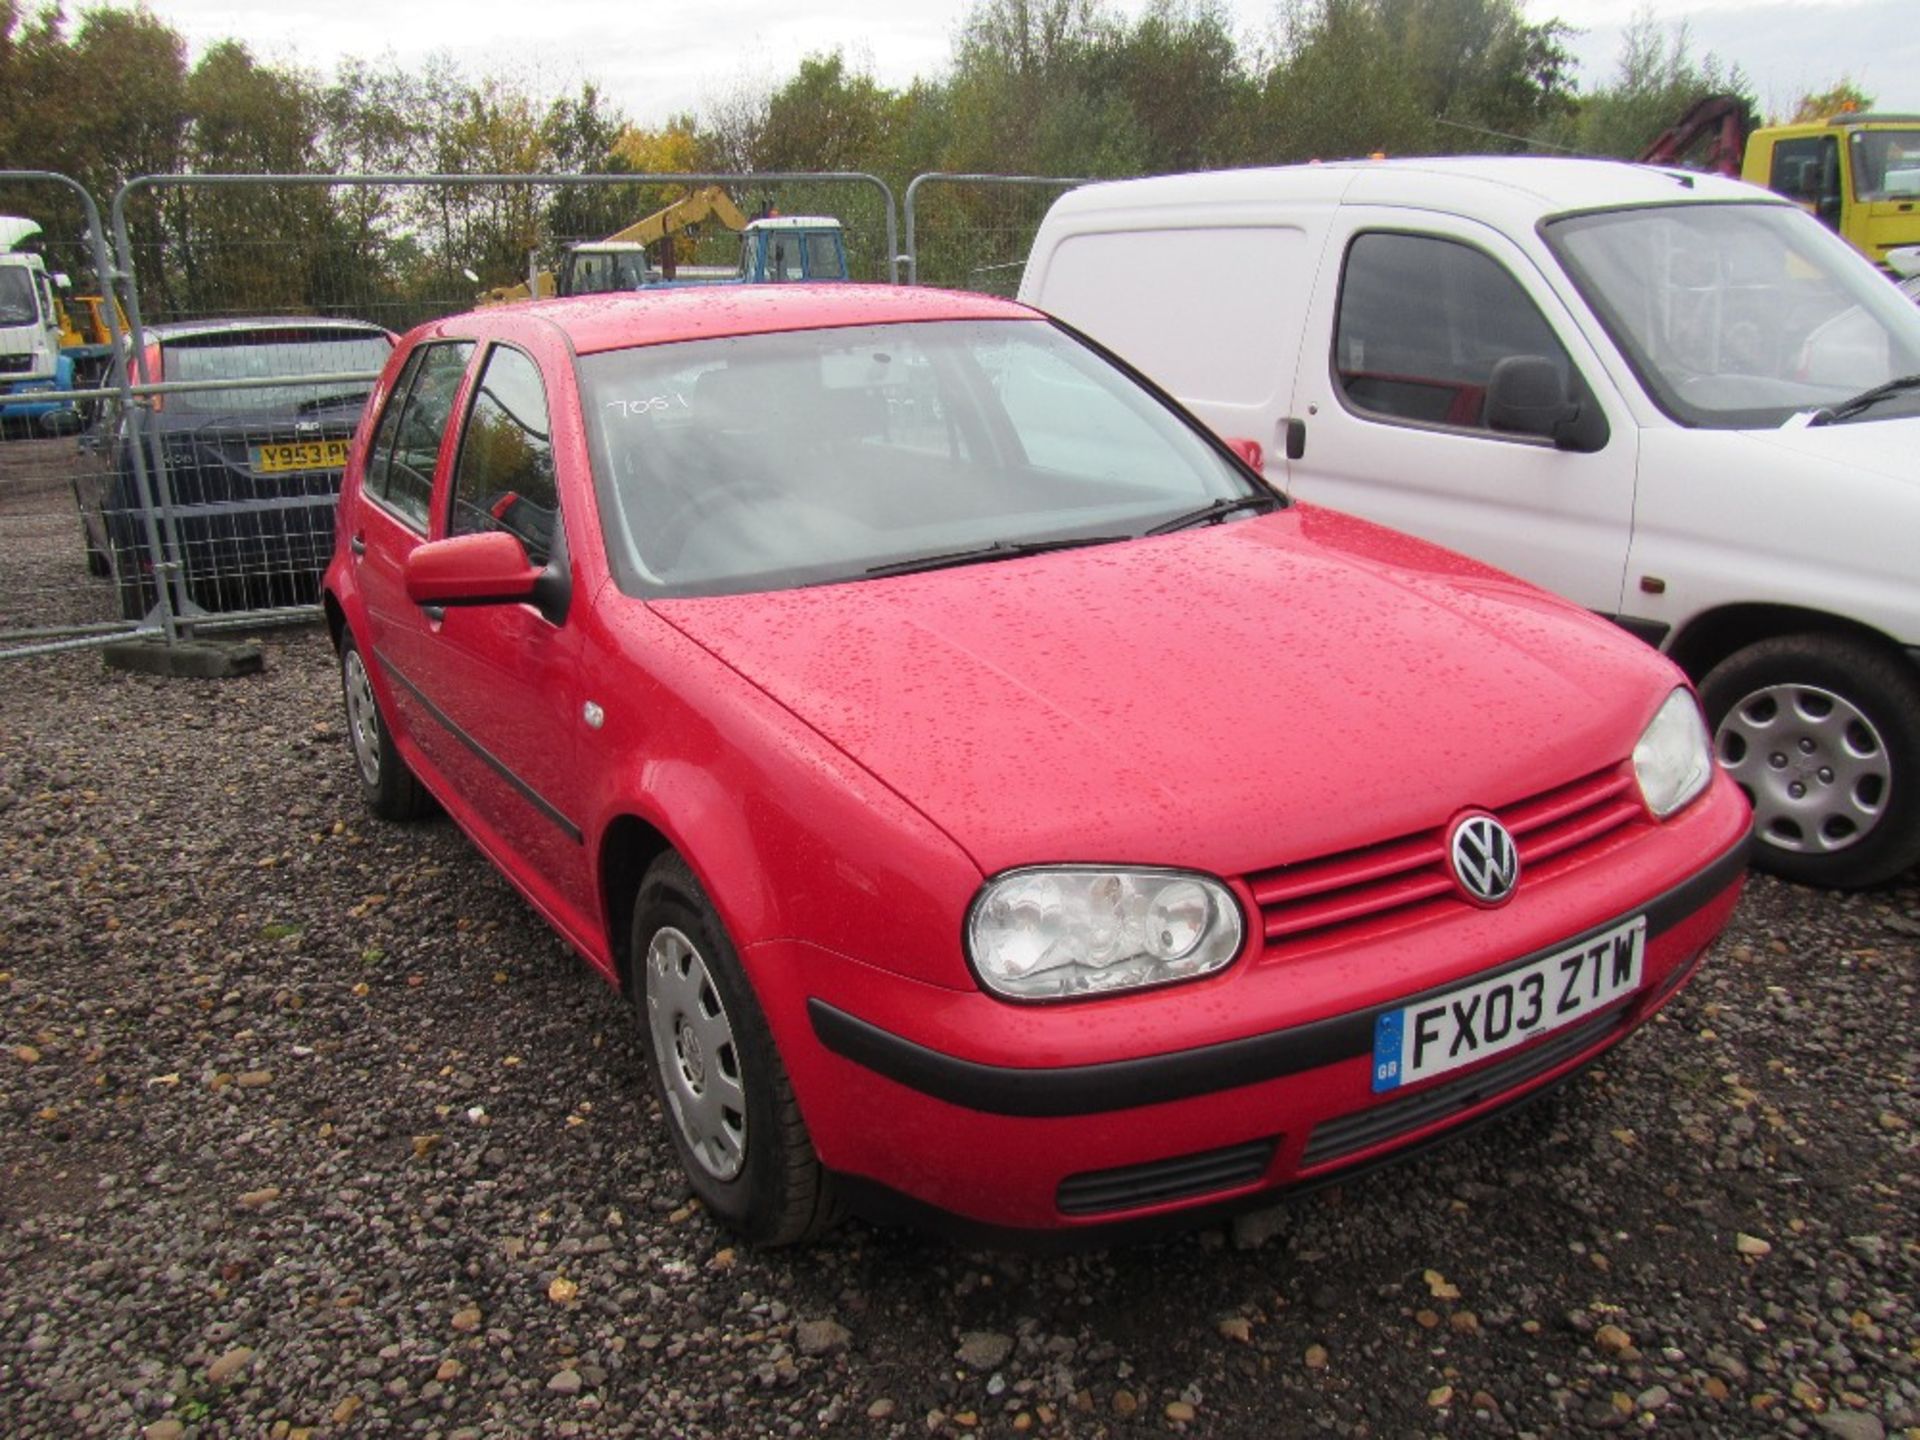 VW Golf E SDI 1.9 5 Door with Part Service History. Reg Docs will be supplied. Mileage: 137,658. MOT - Image 2 of 4